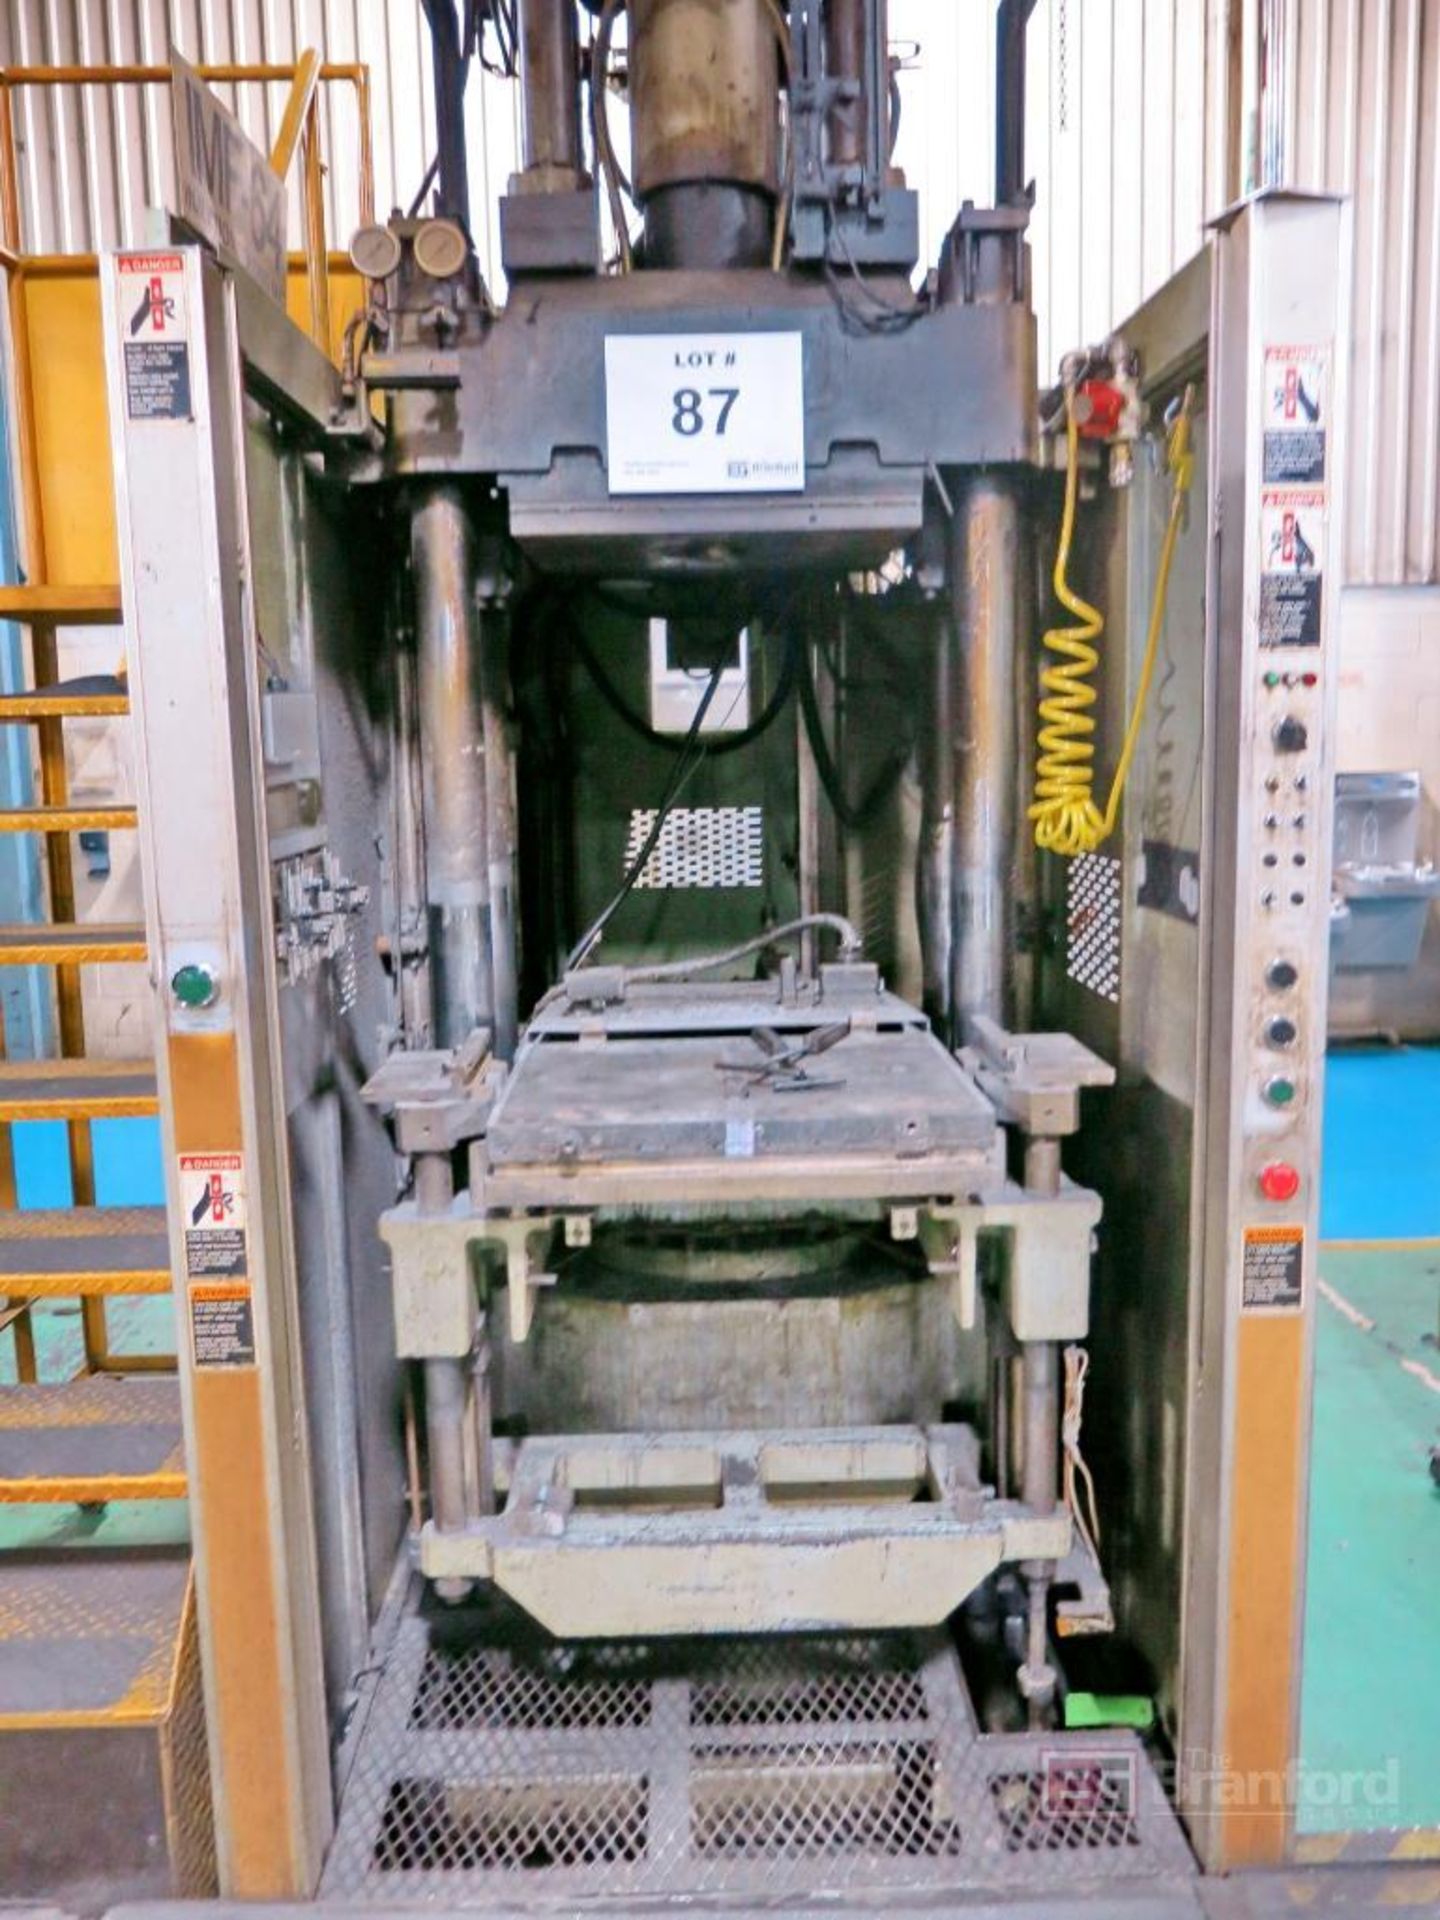 Sanyu 1.6L Vertical Rubber Injection Molding Machine - Image 3 of 5